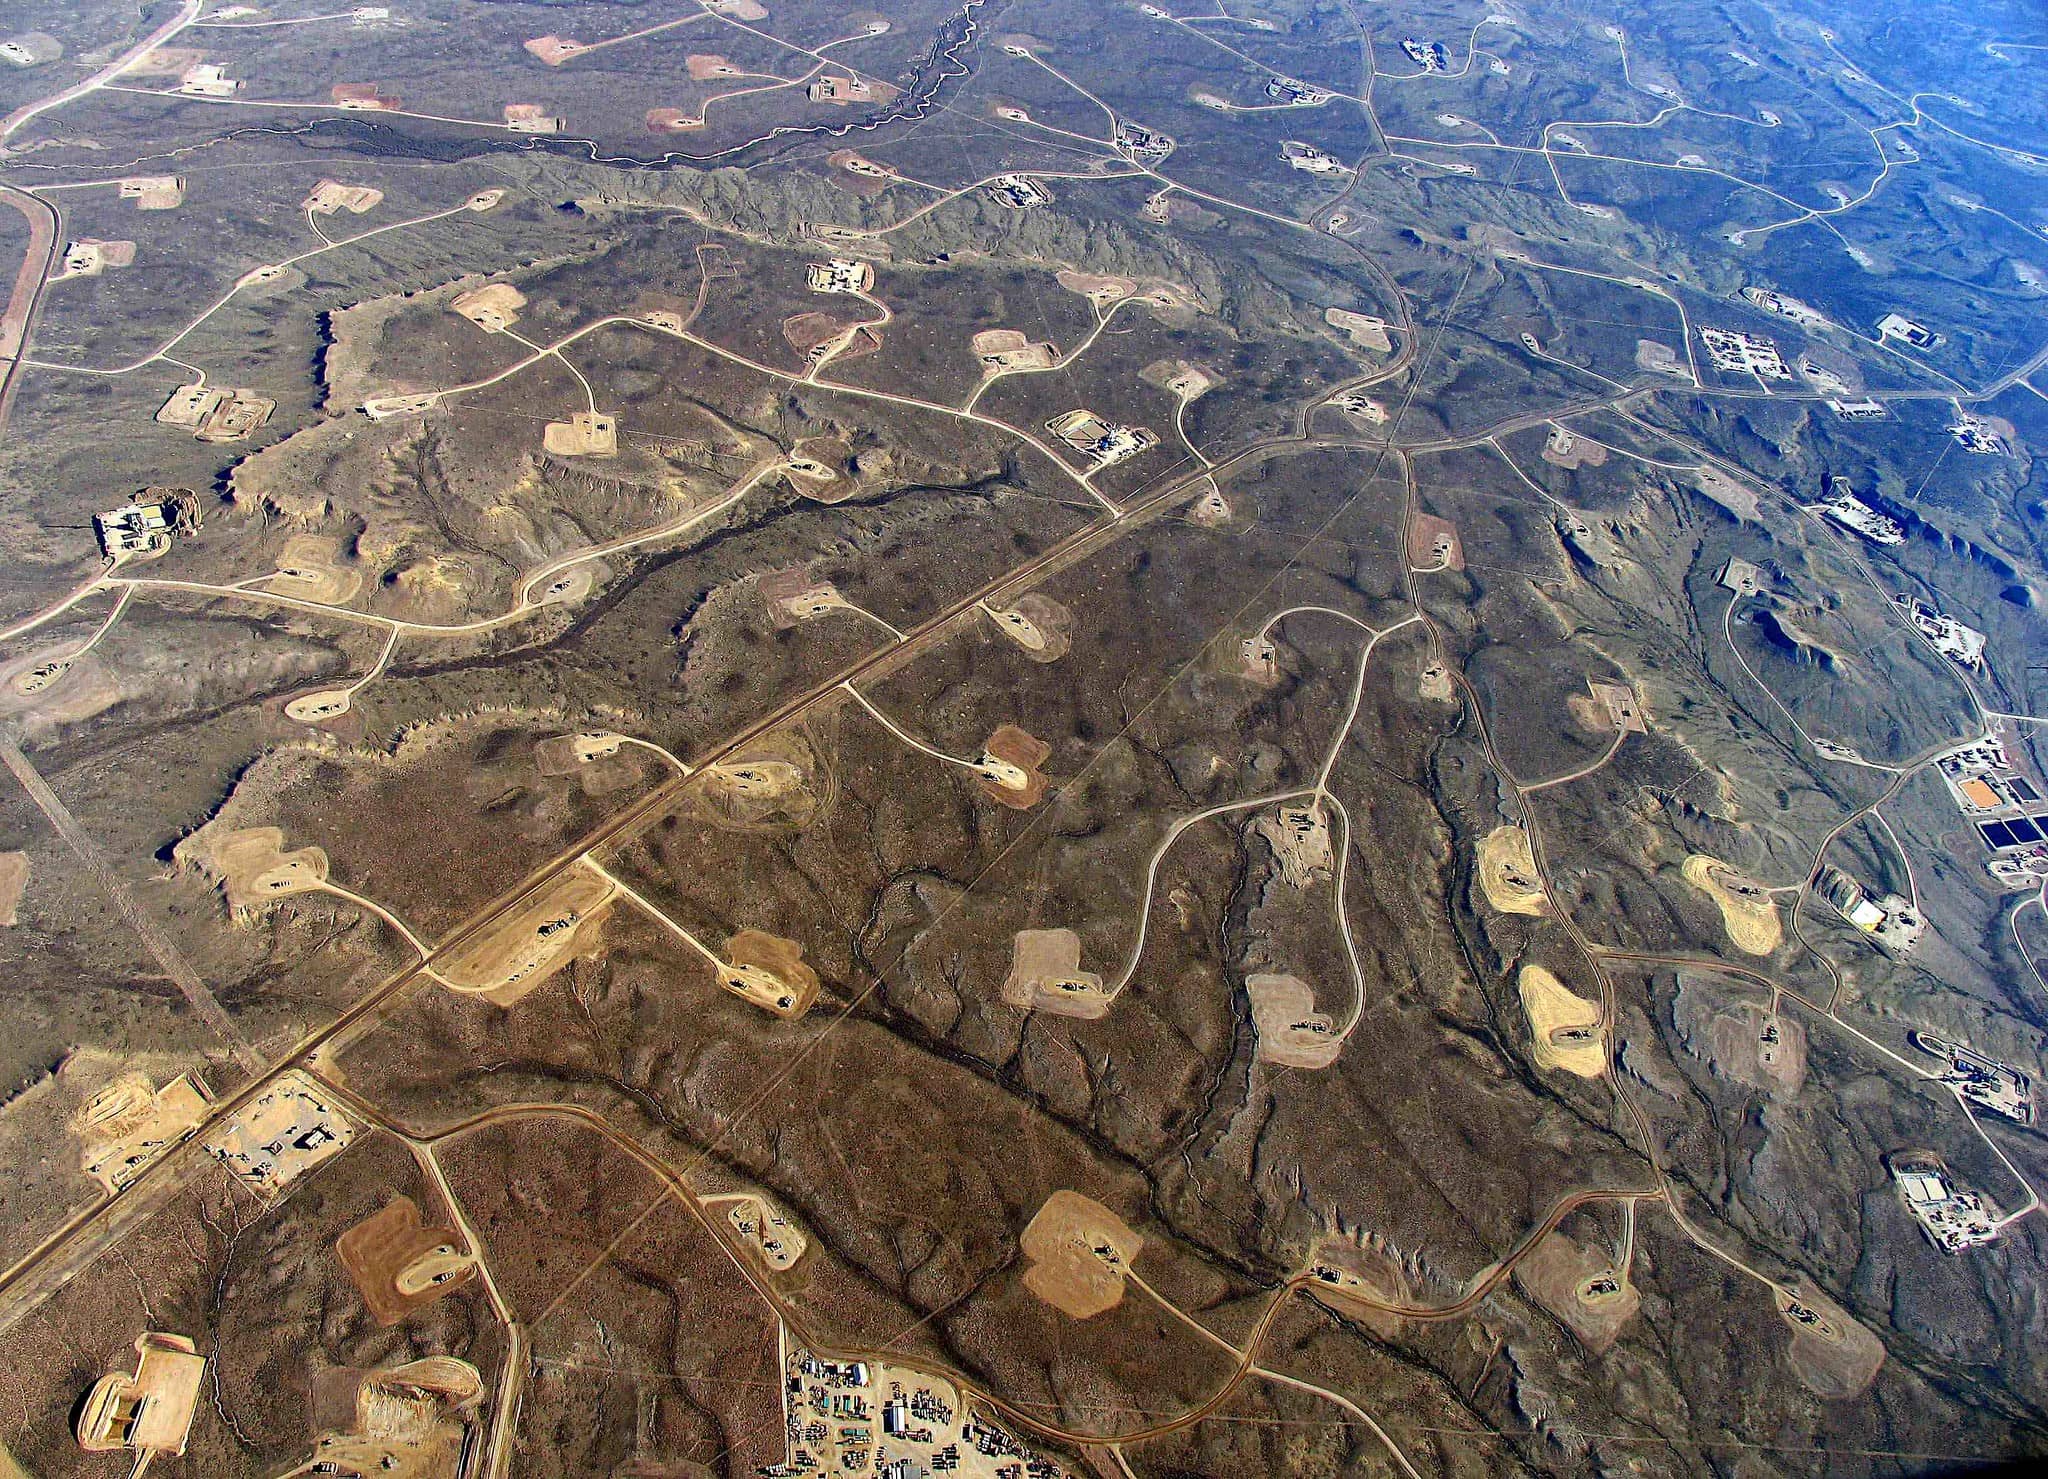 Aerial view of fracking sites